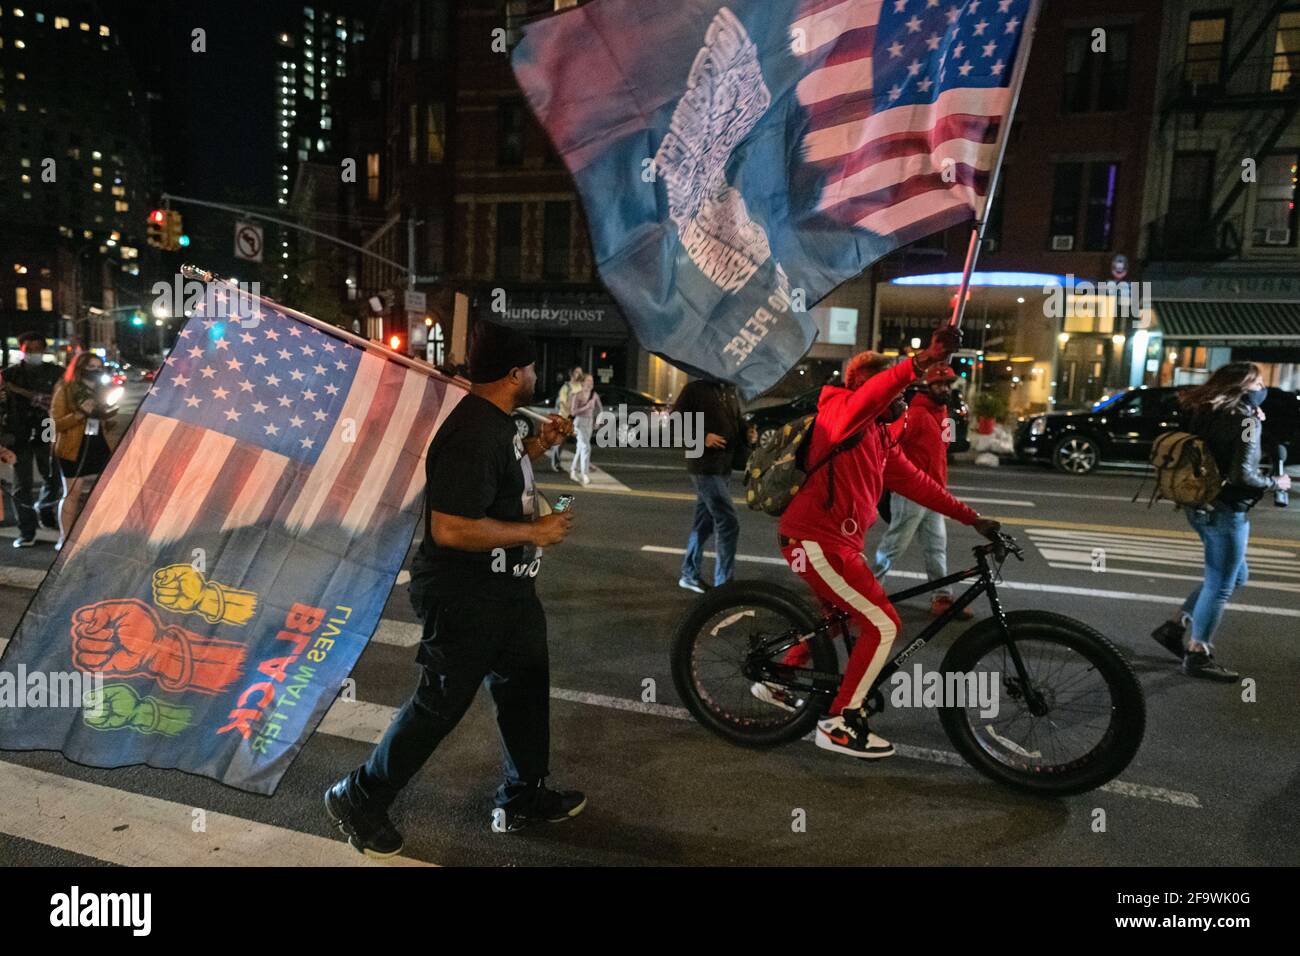 Brooklyn, New York, USA 20 Apr 2021. Protesters wave large Black Lives Matter flags during march through streets of Brooklyn hours after a jury found former Minneapolis police officer Derek Chauvin guilty of murdering George Floyd in 2020. Stock Photo